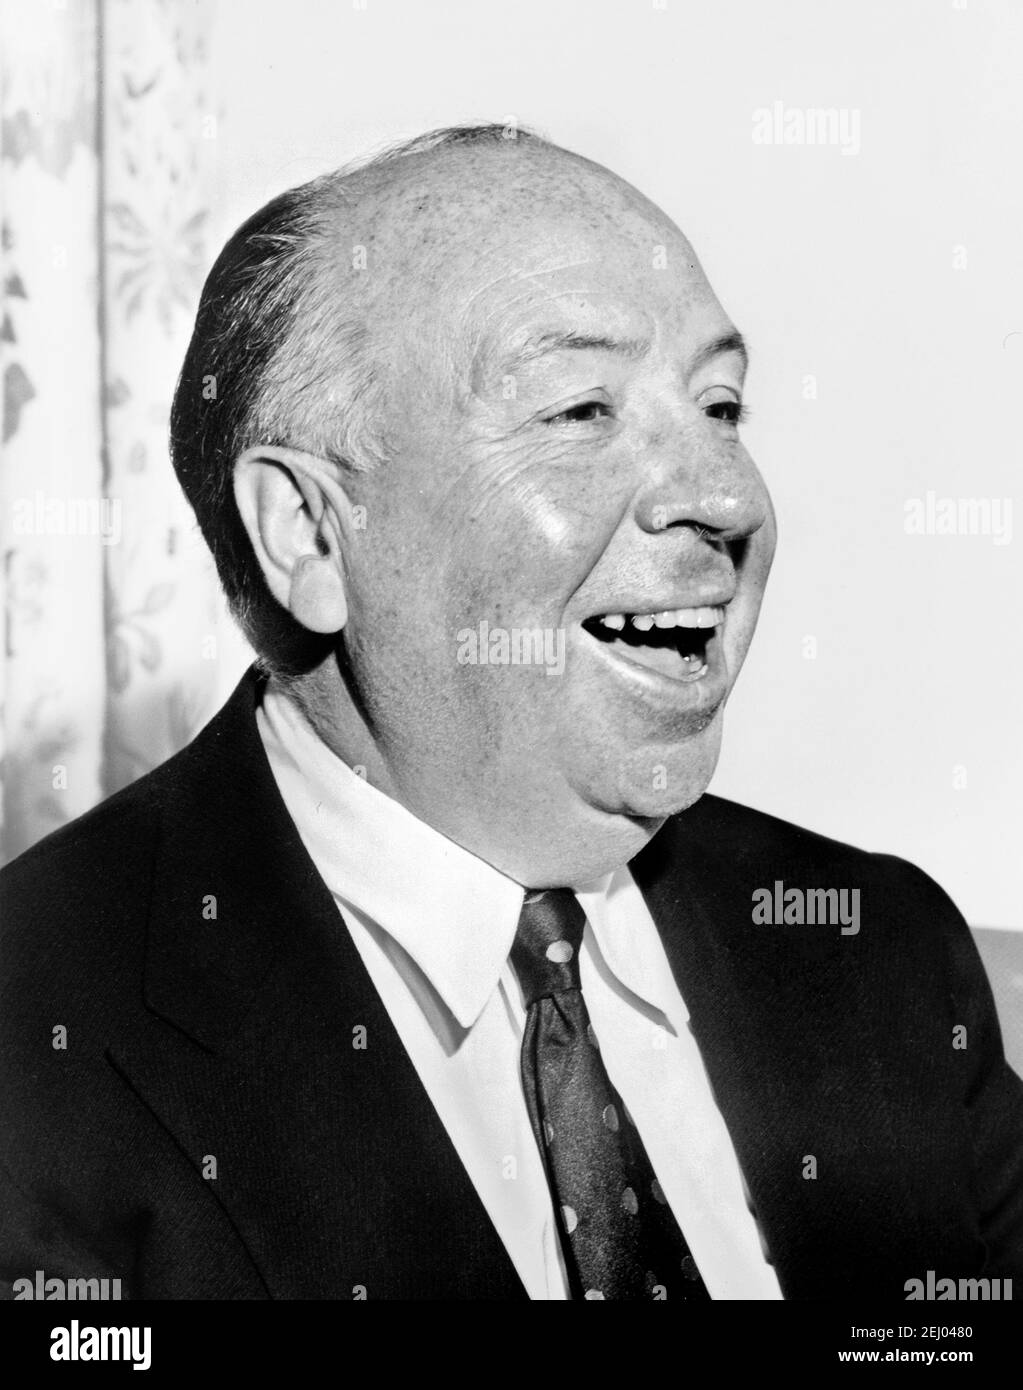 Alfred Hitchcock. Portrait of the English film director, Sir Alfred Joseph Hitchcock (1899-1980), 1956 Stock Photo